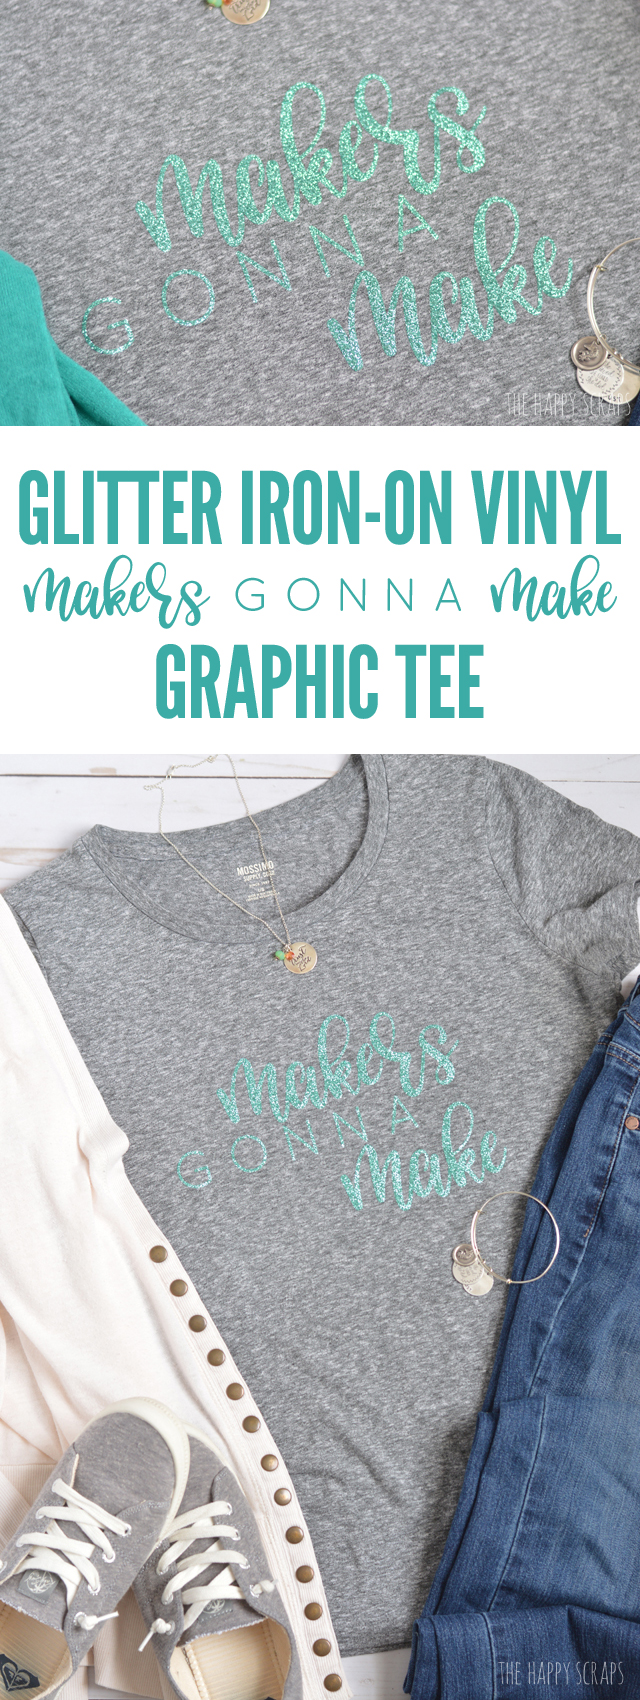 Glitter Iron-on Vinyl Makers Gonna Make Graphic Tee - The Happy Scraps